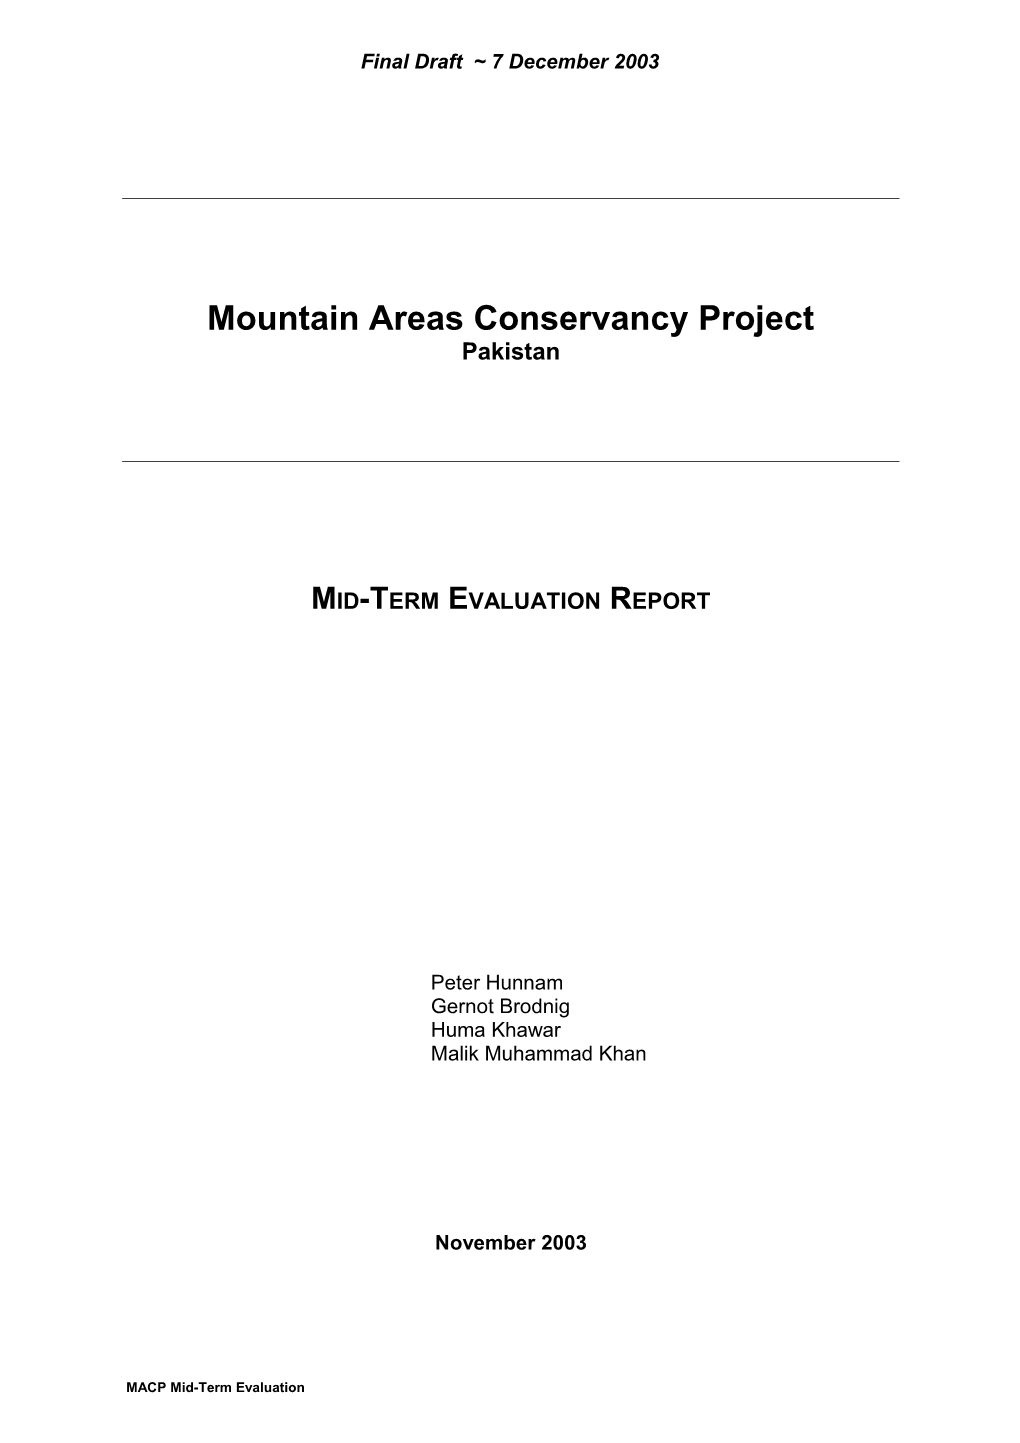 Mountain Areas Conservancy Project